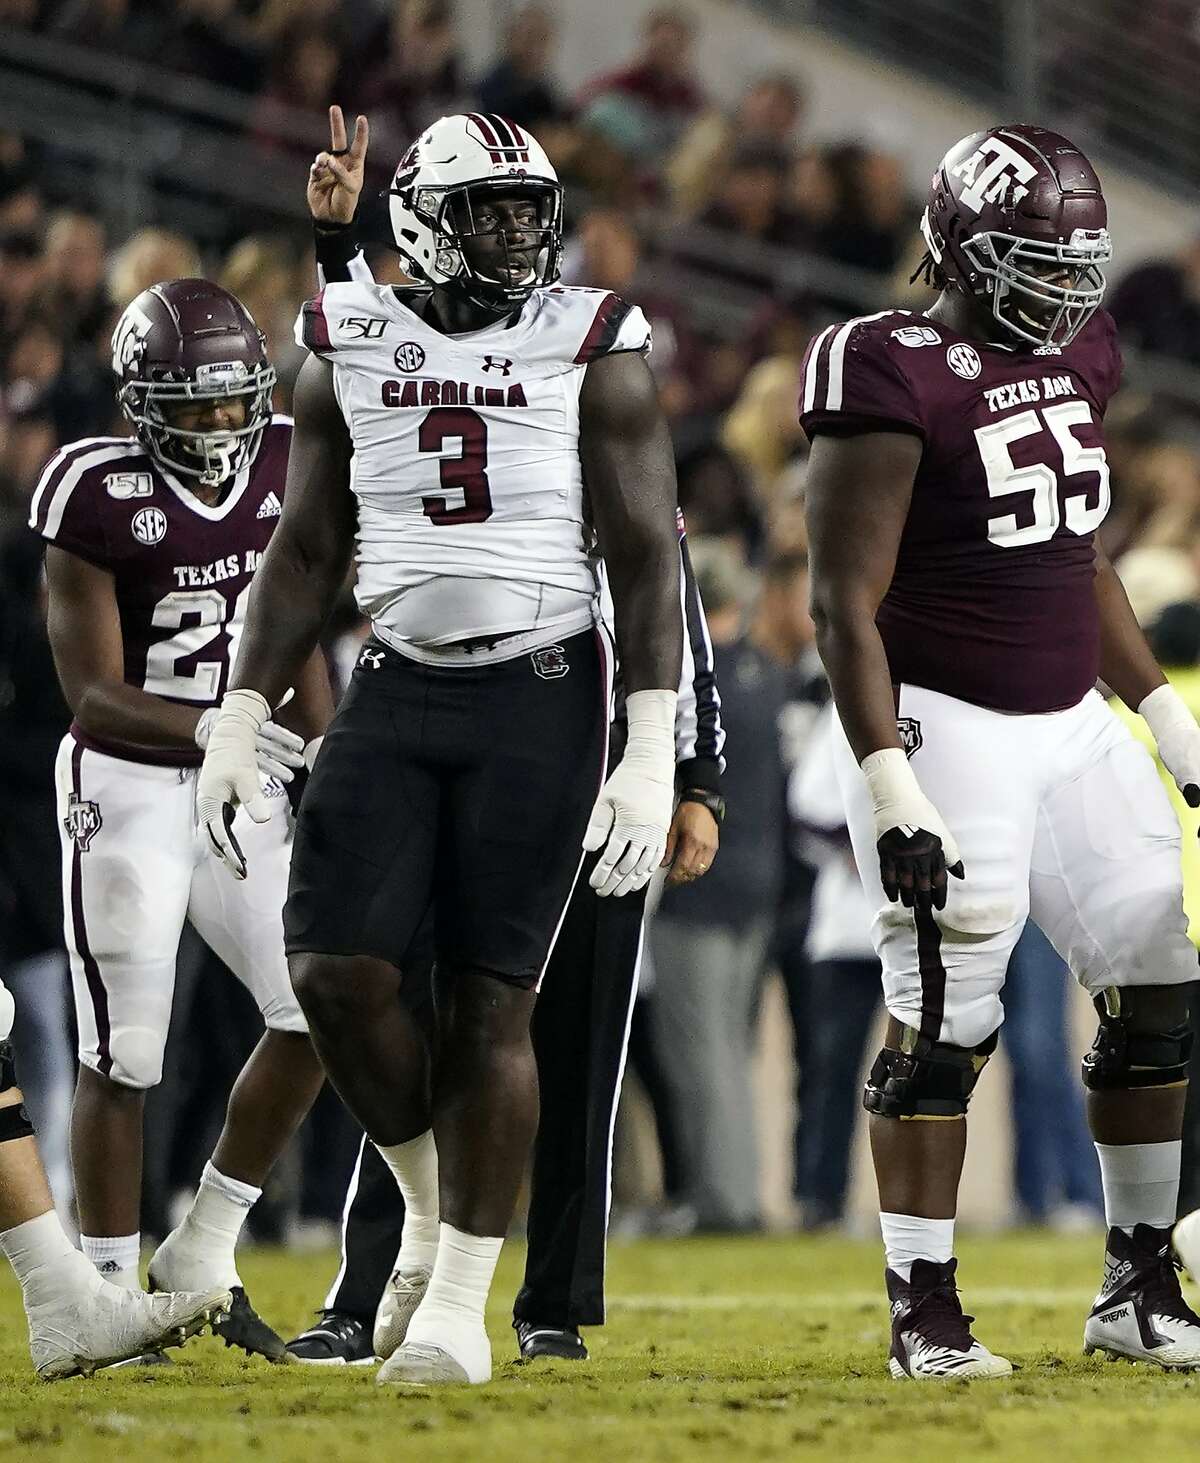 South Carolina State's Javon Kinlaw (3) walks back to the huddle after a play against Texas A&M during the first quarter of an NCAA college football game Saturday, Nov. 16, 2019, in College Station, Texas. (AP Photo/David J. Phillip)